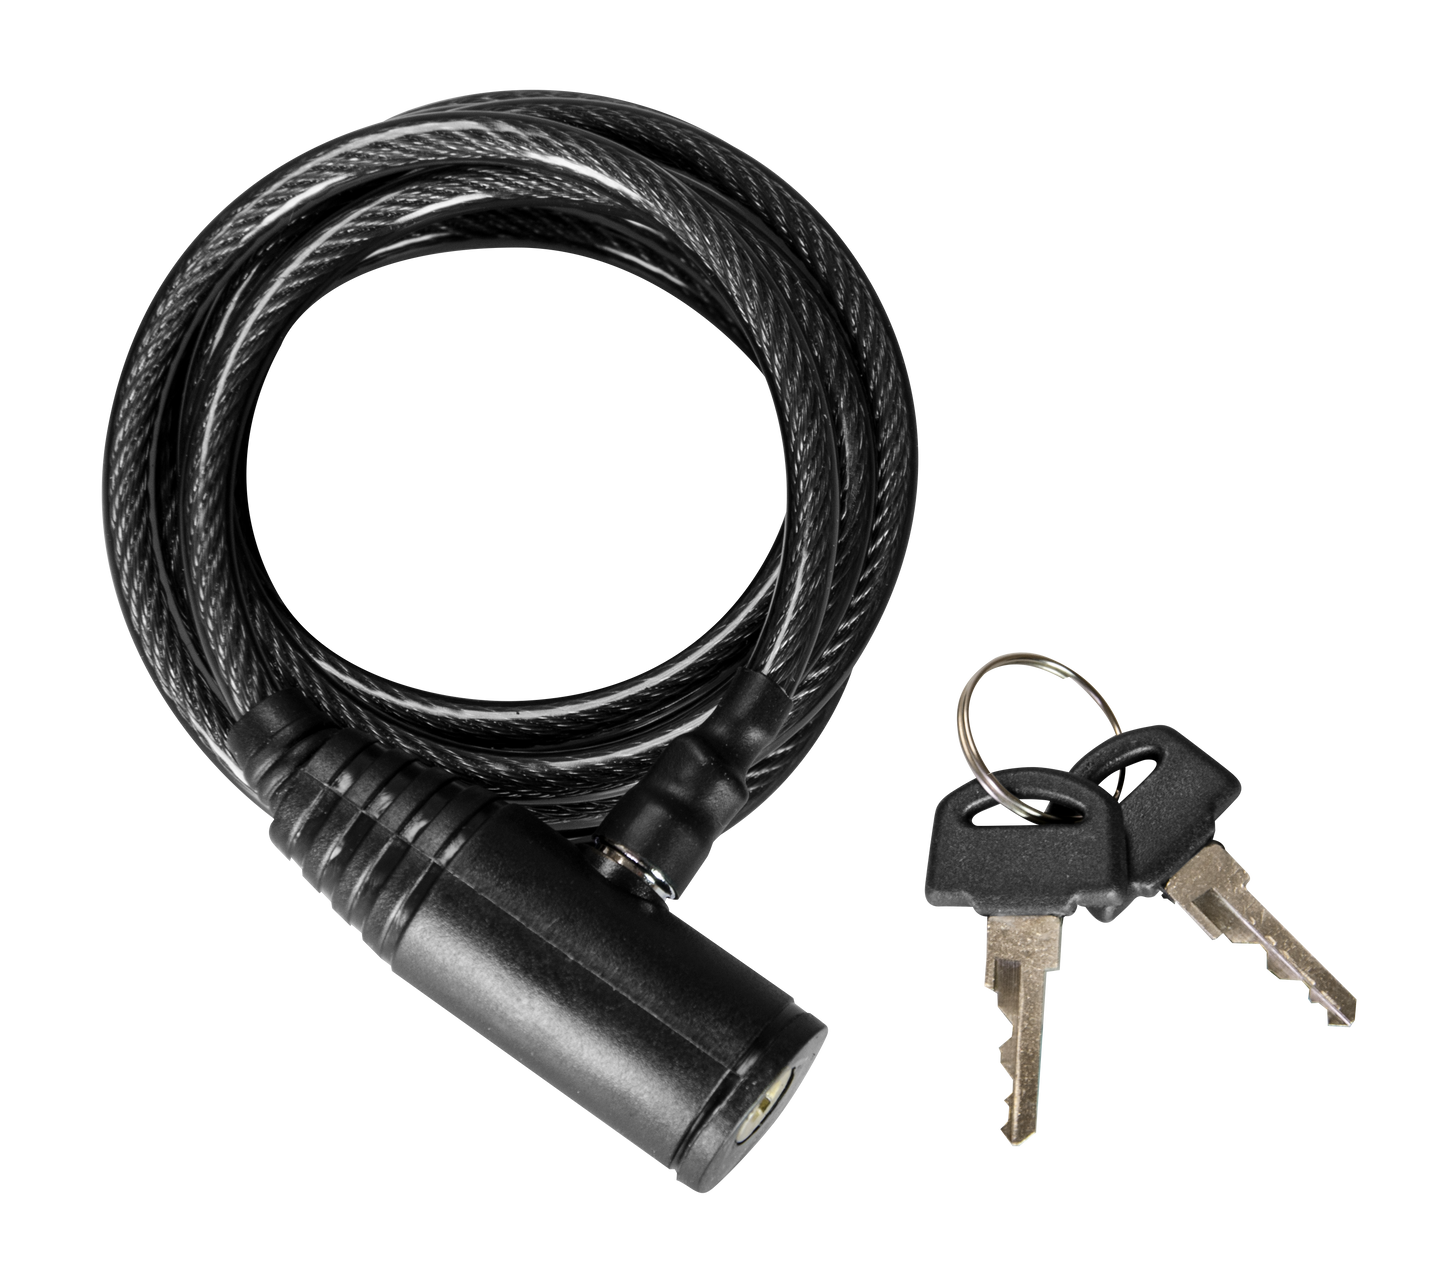 SPYPOINT® CABLE LOCK